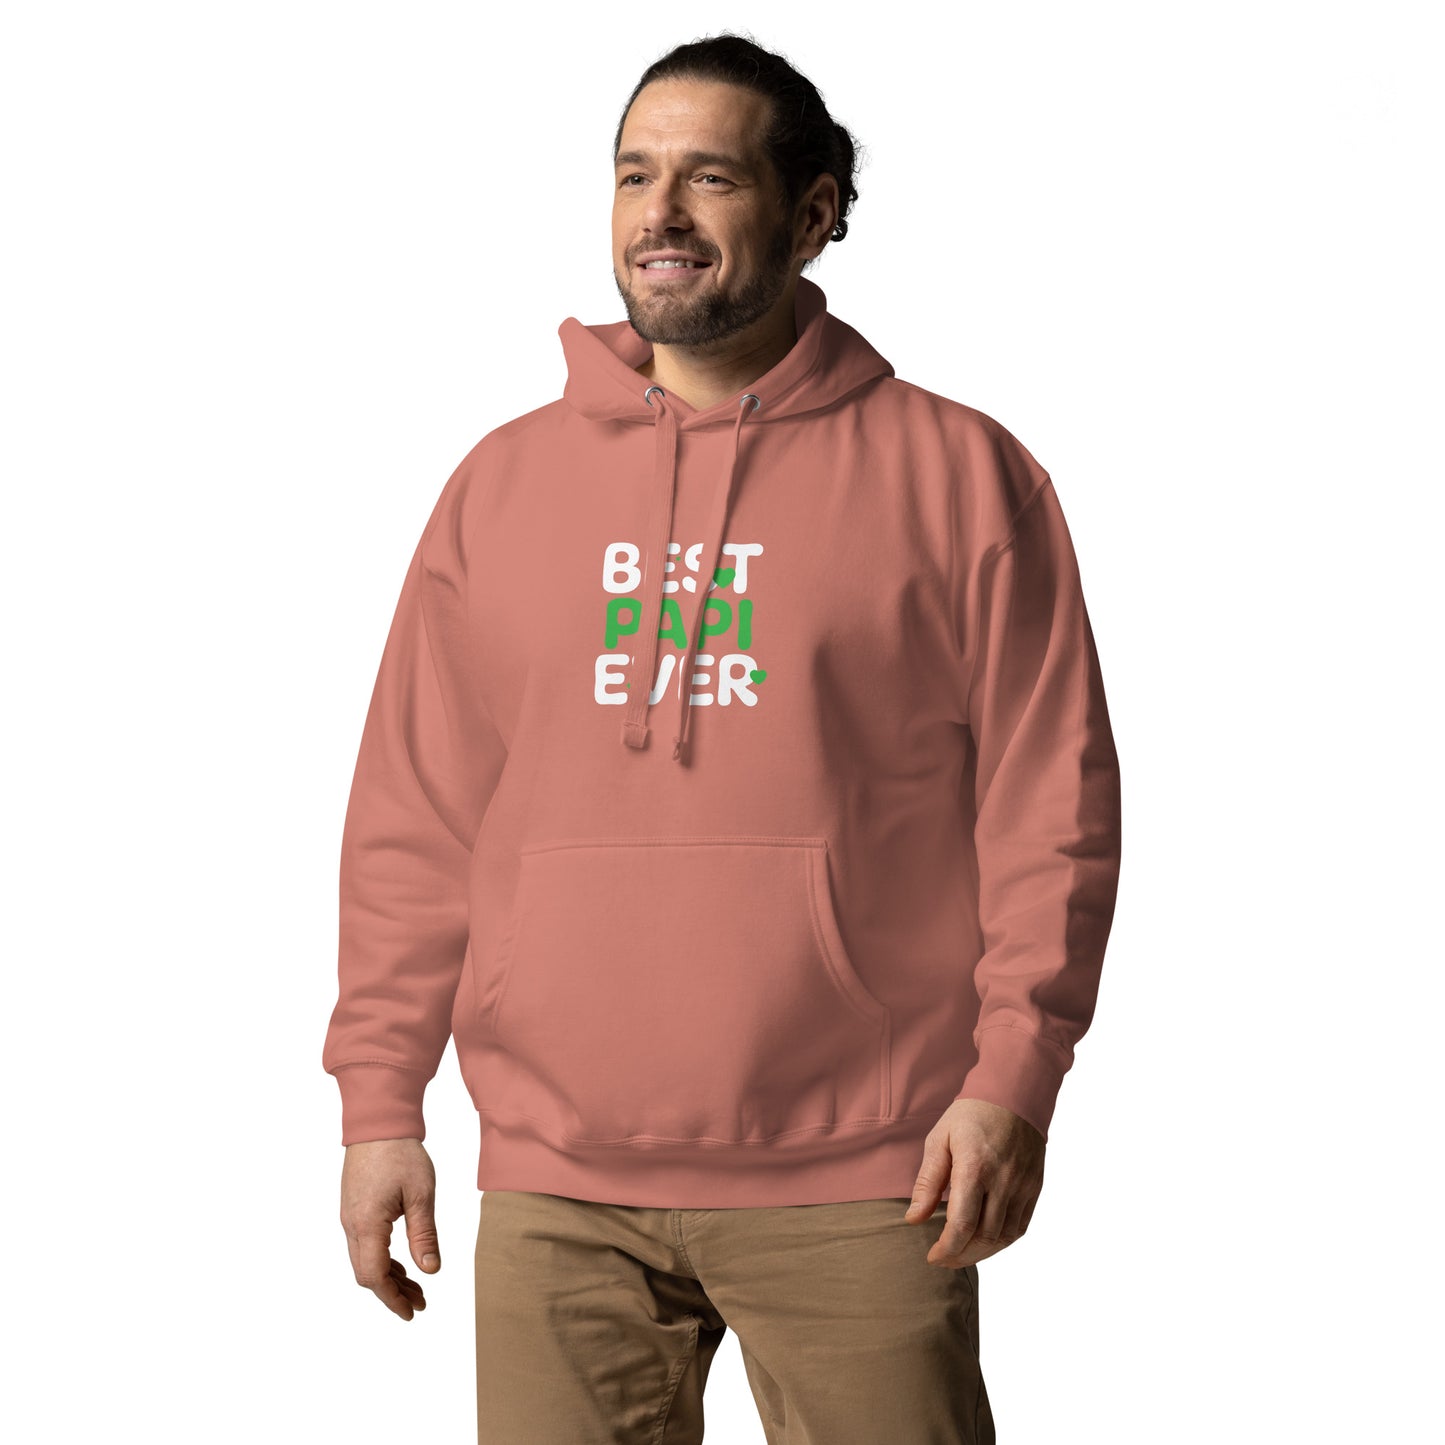 Best Daddy Ever Hoodie (Spanglish)